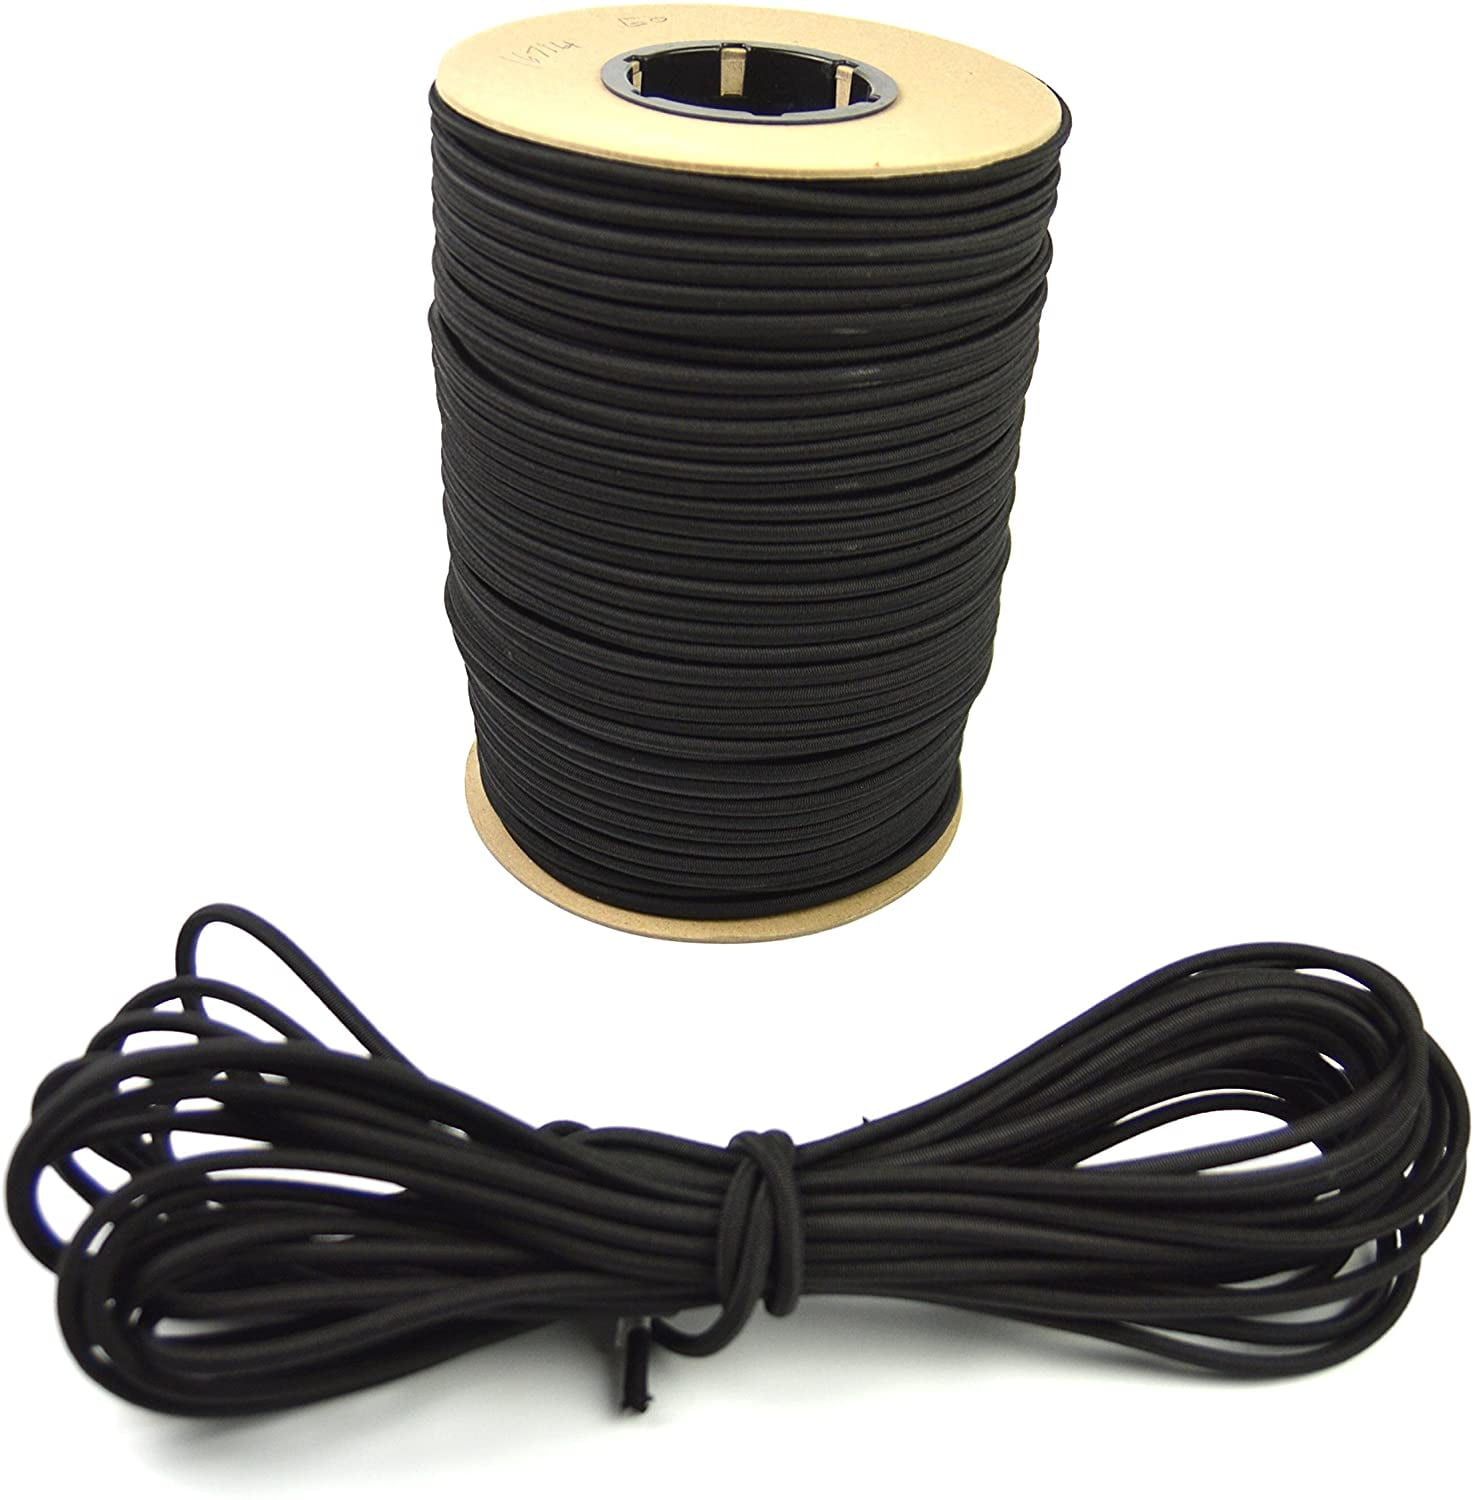 SGT KNOTS Polypro Bungee Shock Cord Industrial & DIY Projects Lightweight Elastic Rope for Crafting 1/8 x 500ft Spool, Black 